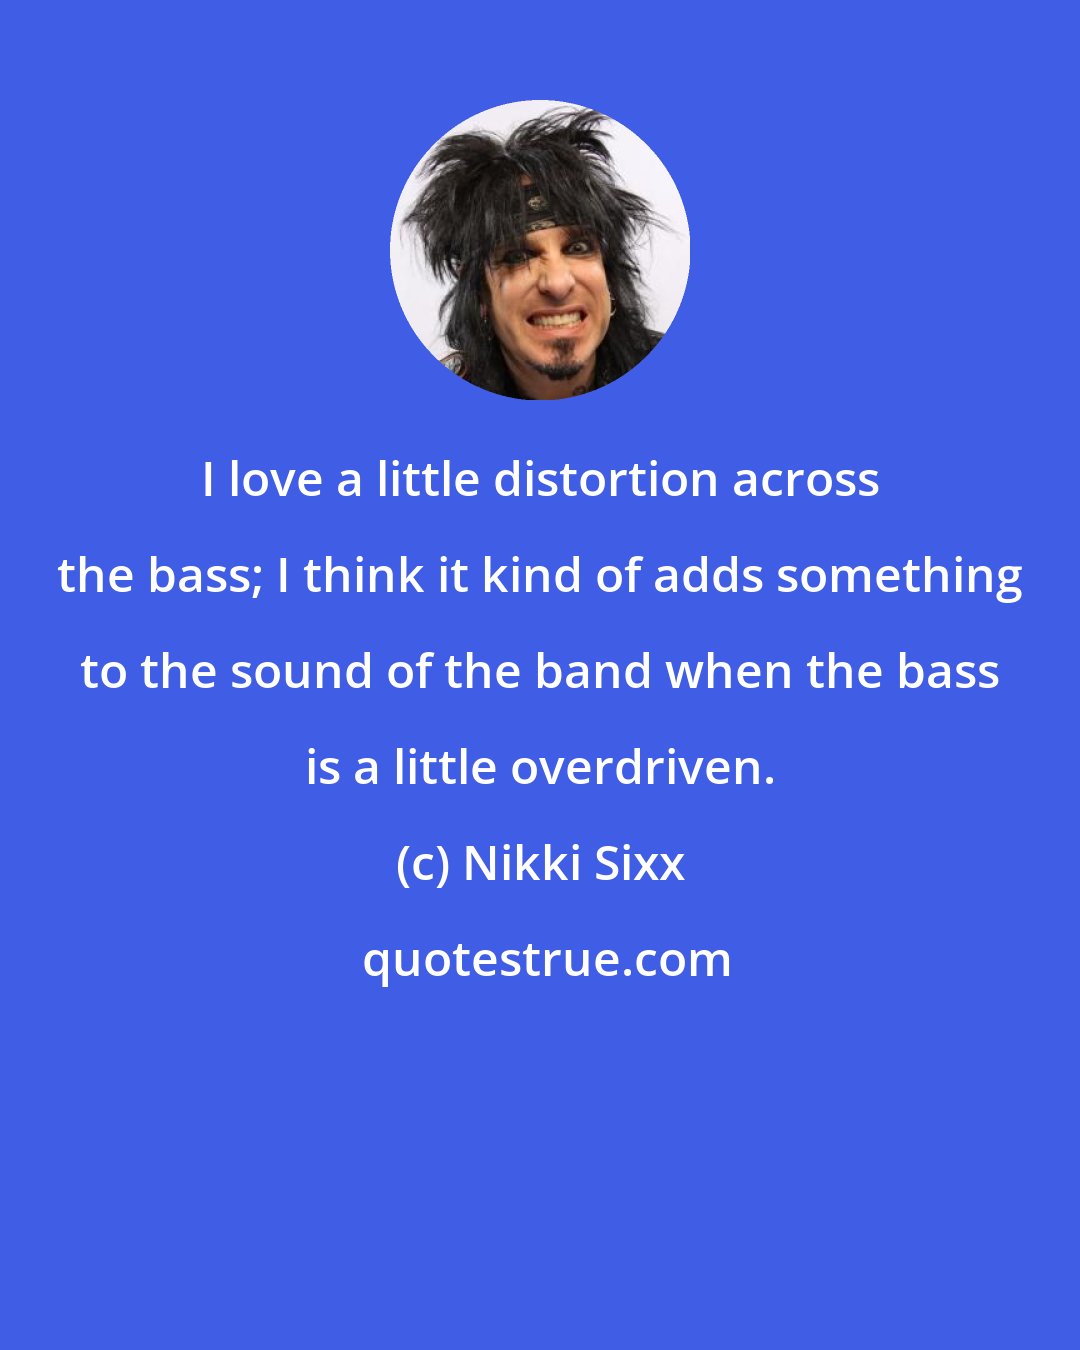 Nikki Sixx: I love a little distortion across the bass; I think it kind of adds something to the sound of the band when the bass is a little overdriven.